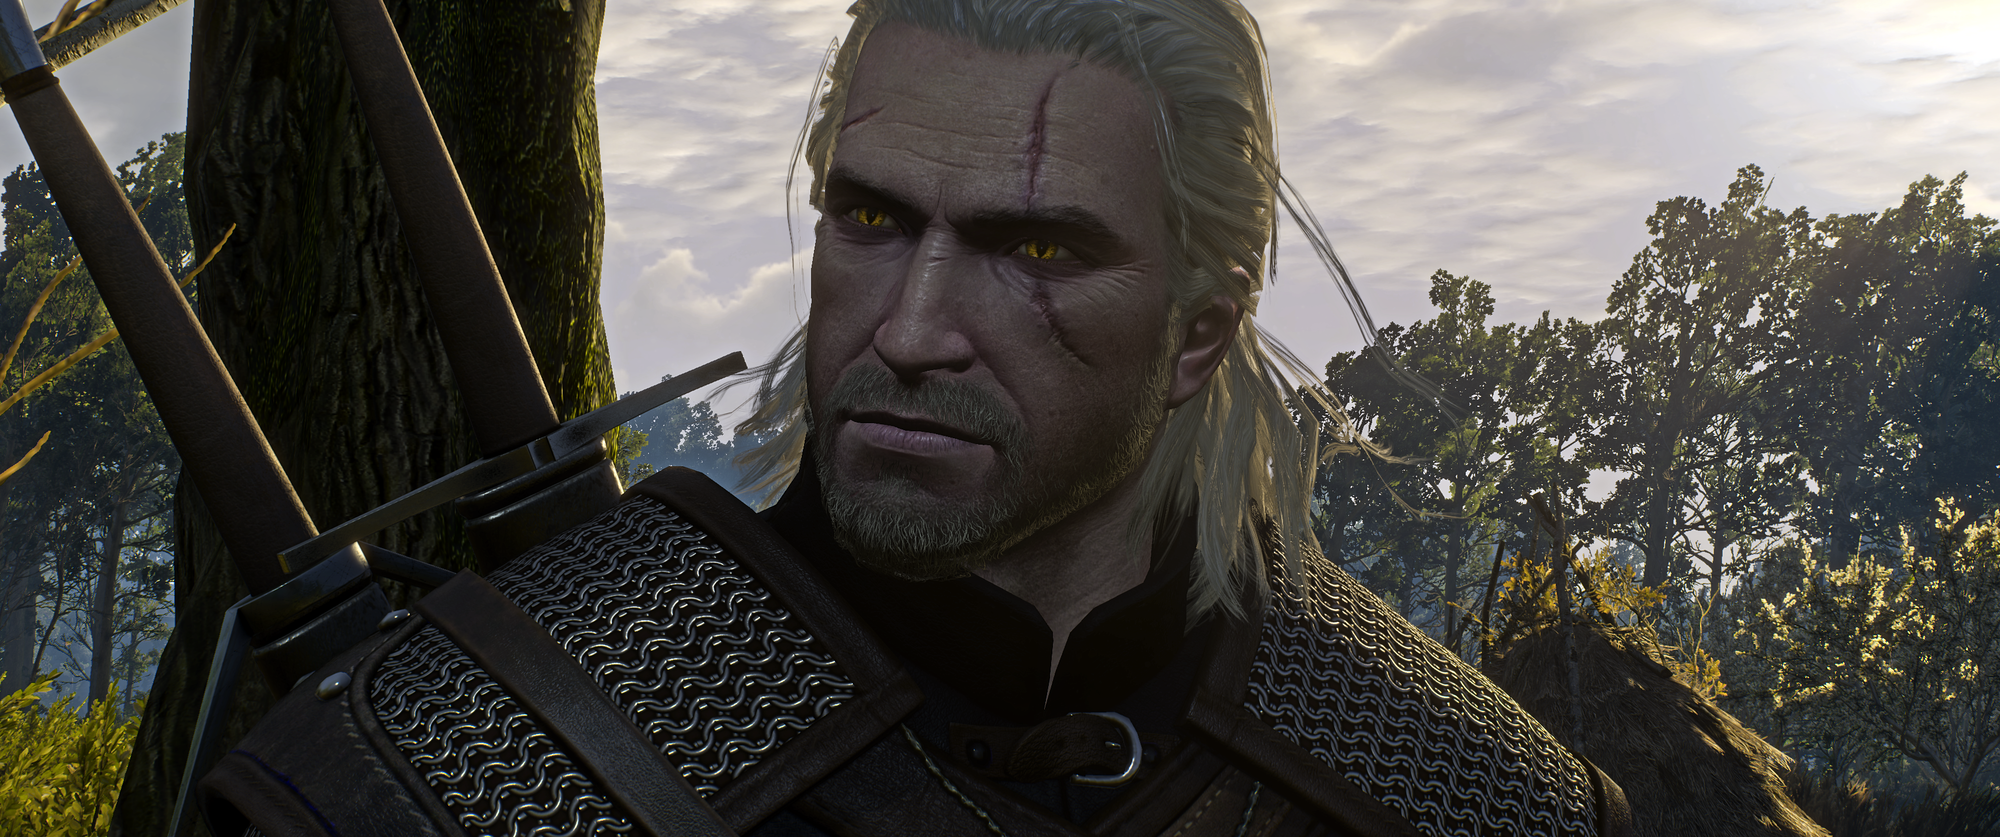 The Witcher 3 Screenshot 2019.01.02 - 20.33.49.16.png